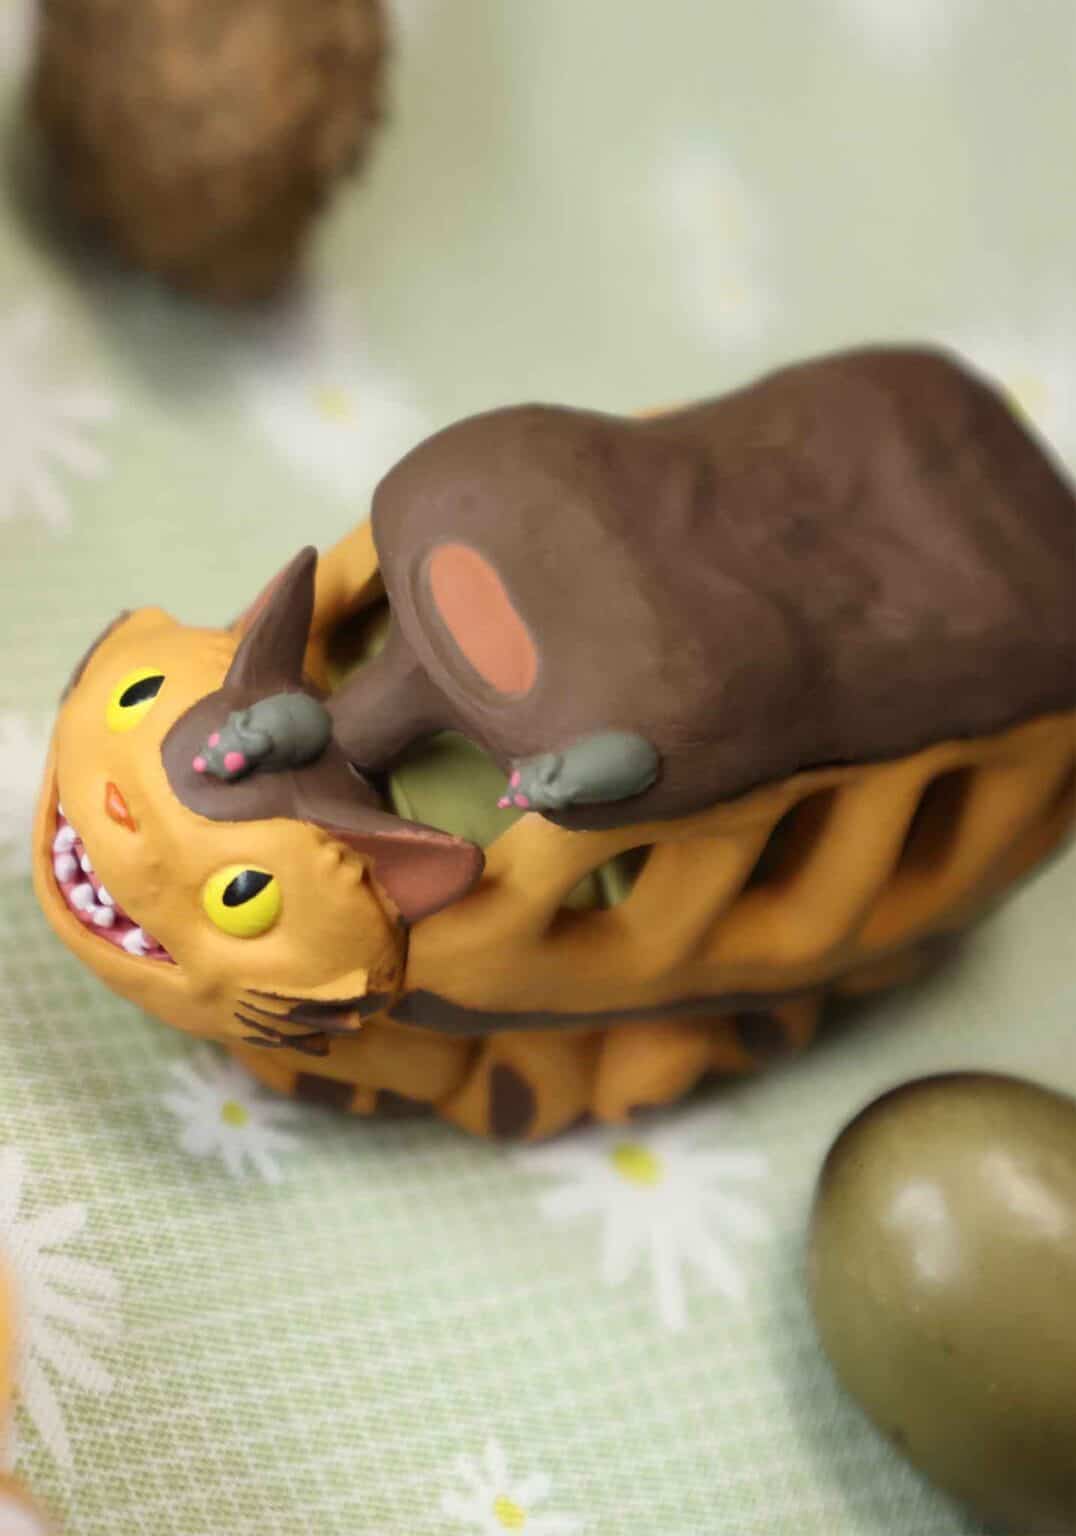 Clever Idiots My Neighbor Totoro 3" Cat Bus Figure Surprise Box Kawaii Gifts 4990593328611